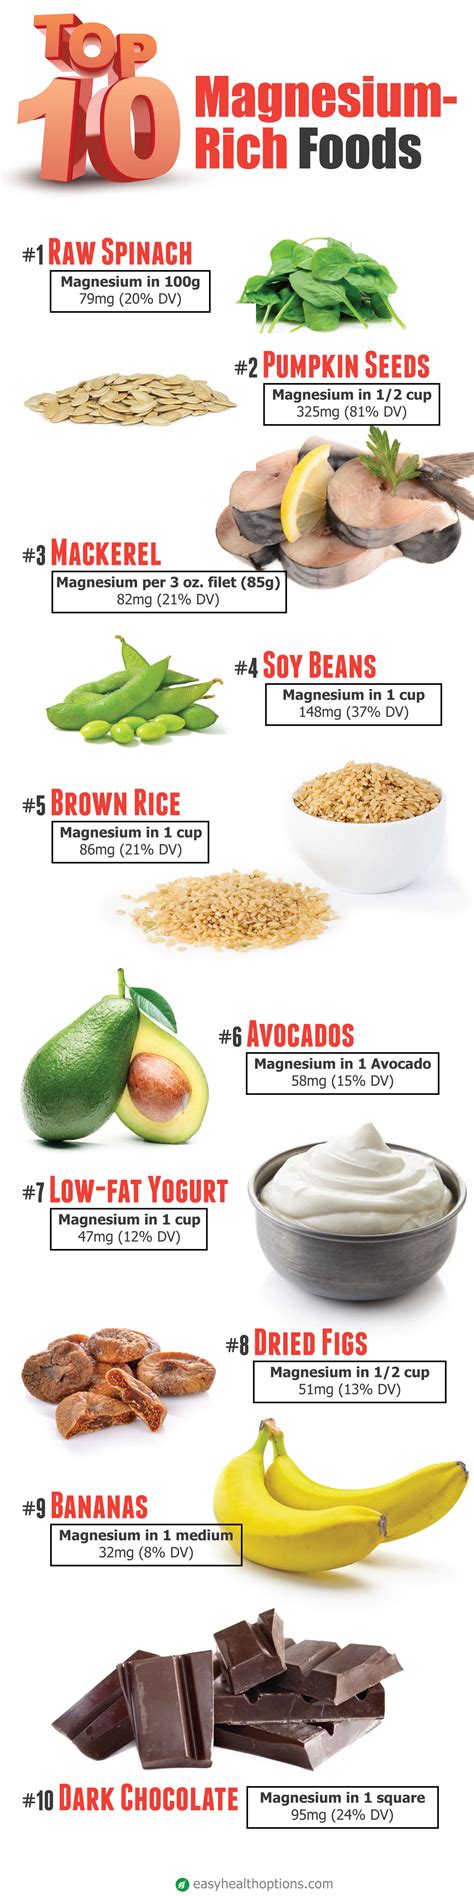 Top 10 magnesium-rich foods [infographic] - Easy Health Options®